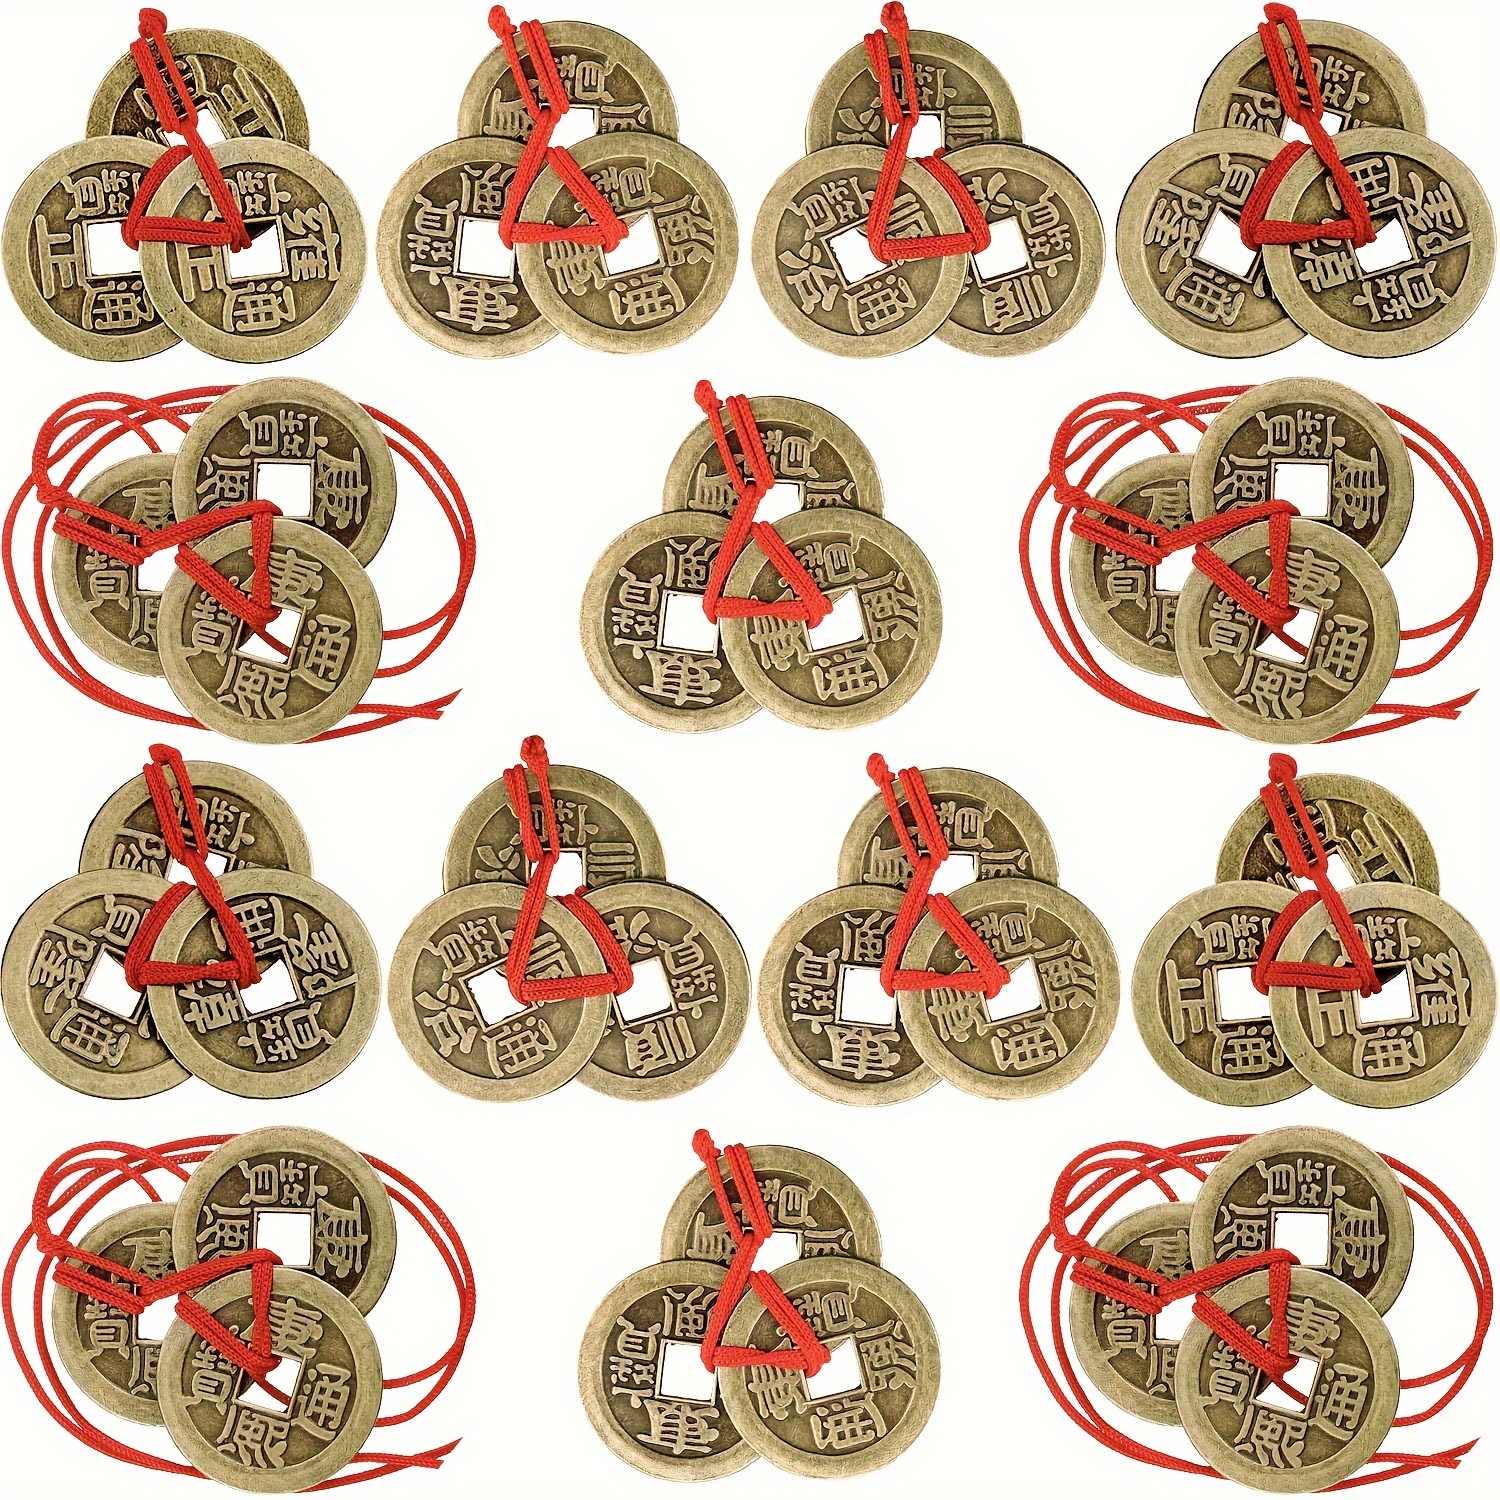 

15pcs Chinese Fortune Coins Feng Shui Coins I Ching Coins Good Luck Coins Traditional Brass New Year Coins With Red String For Wealth And Success, 5 Styles, Home Decor, Scene Decor, Theme Party Decor